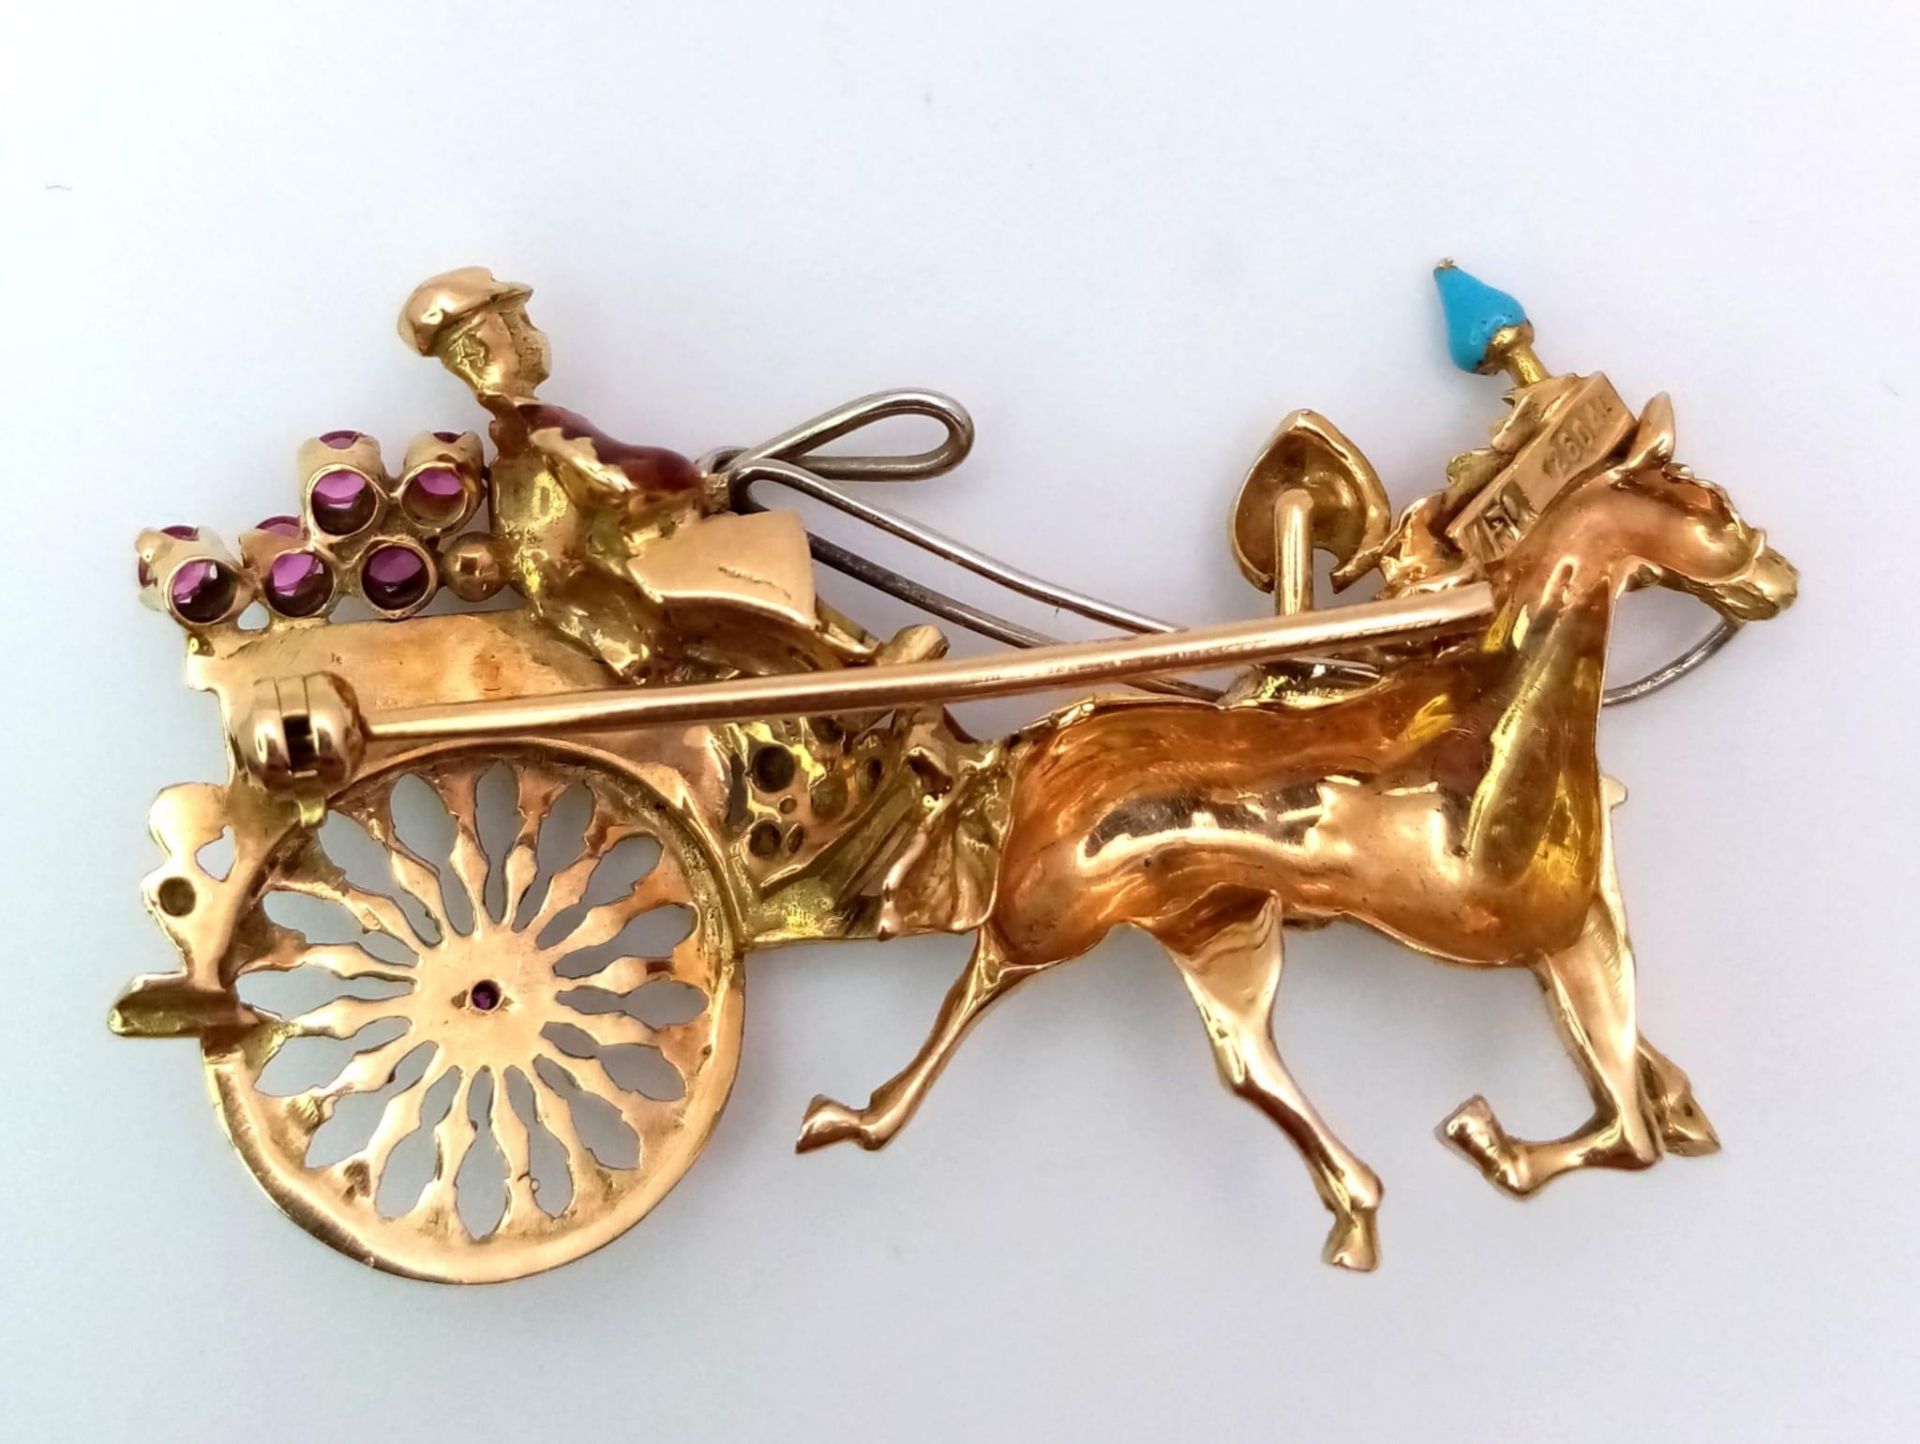 A Vintage 18K Yellow Gold Gemstone and Enamel Horse with Carriage Brooch. Incredible detail with - Image 6 of 8